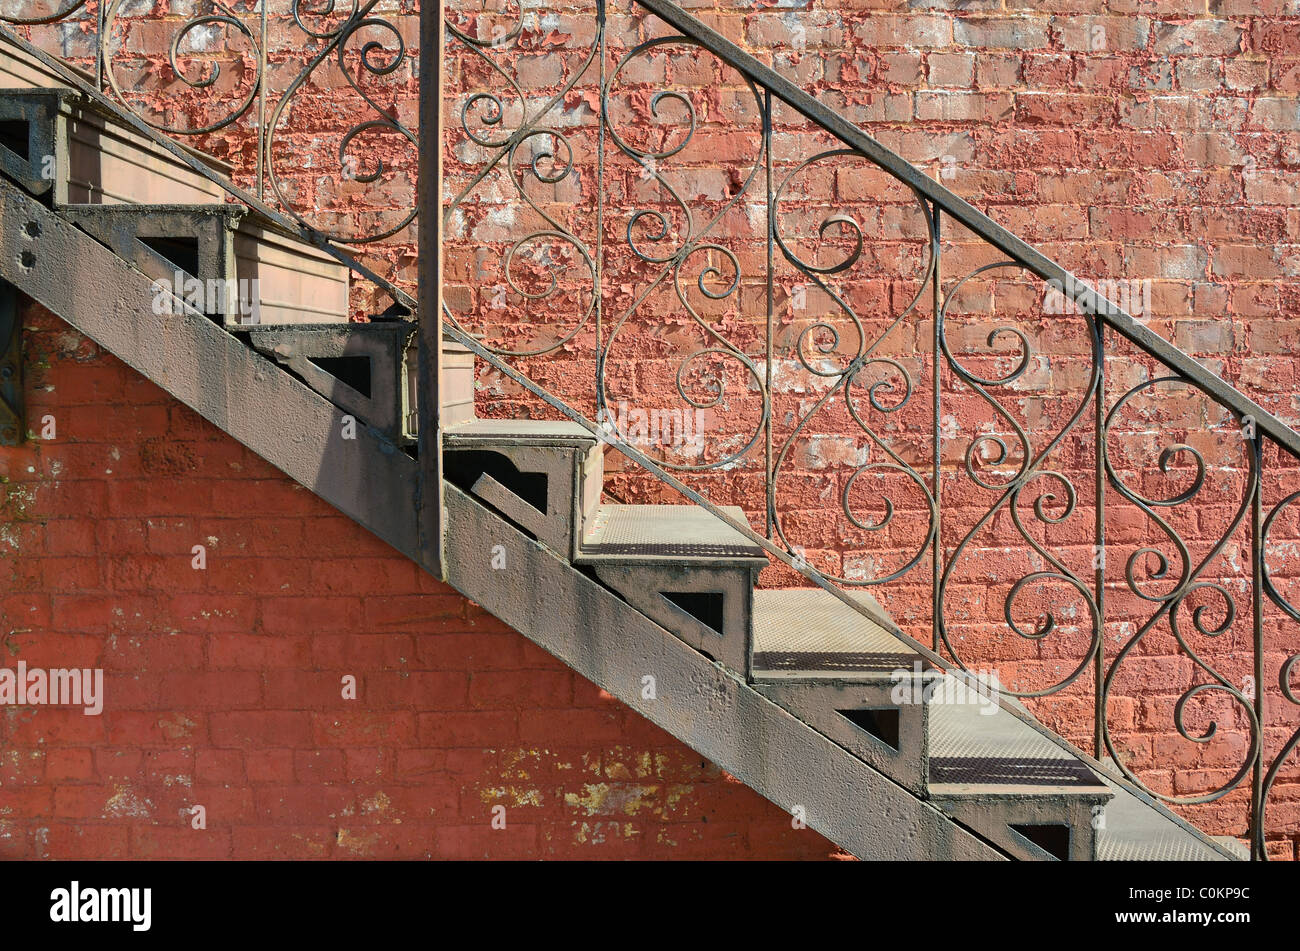 Abstract view of stairs against an exterior brick wall. Stock Photo